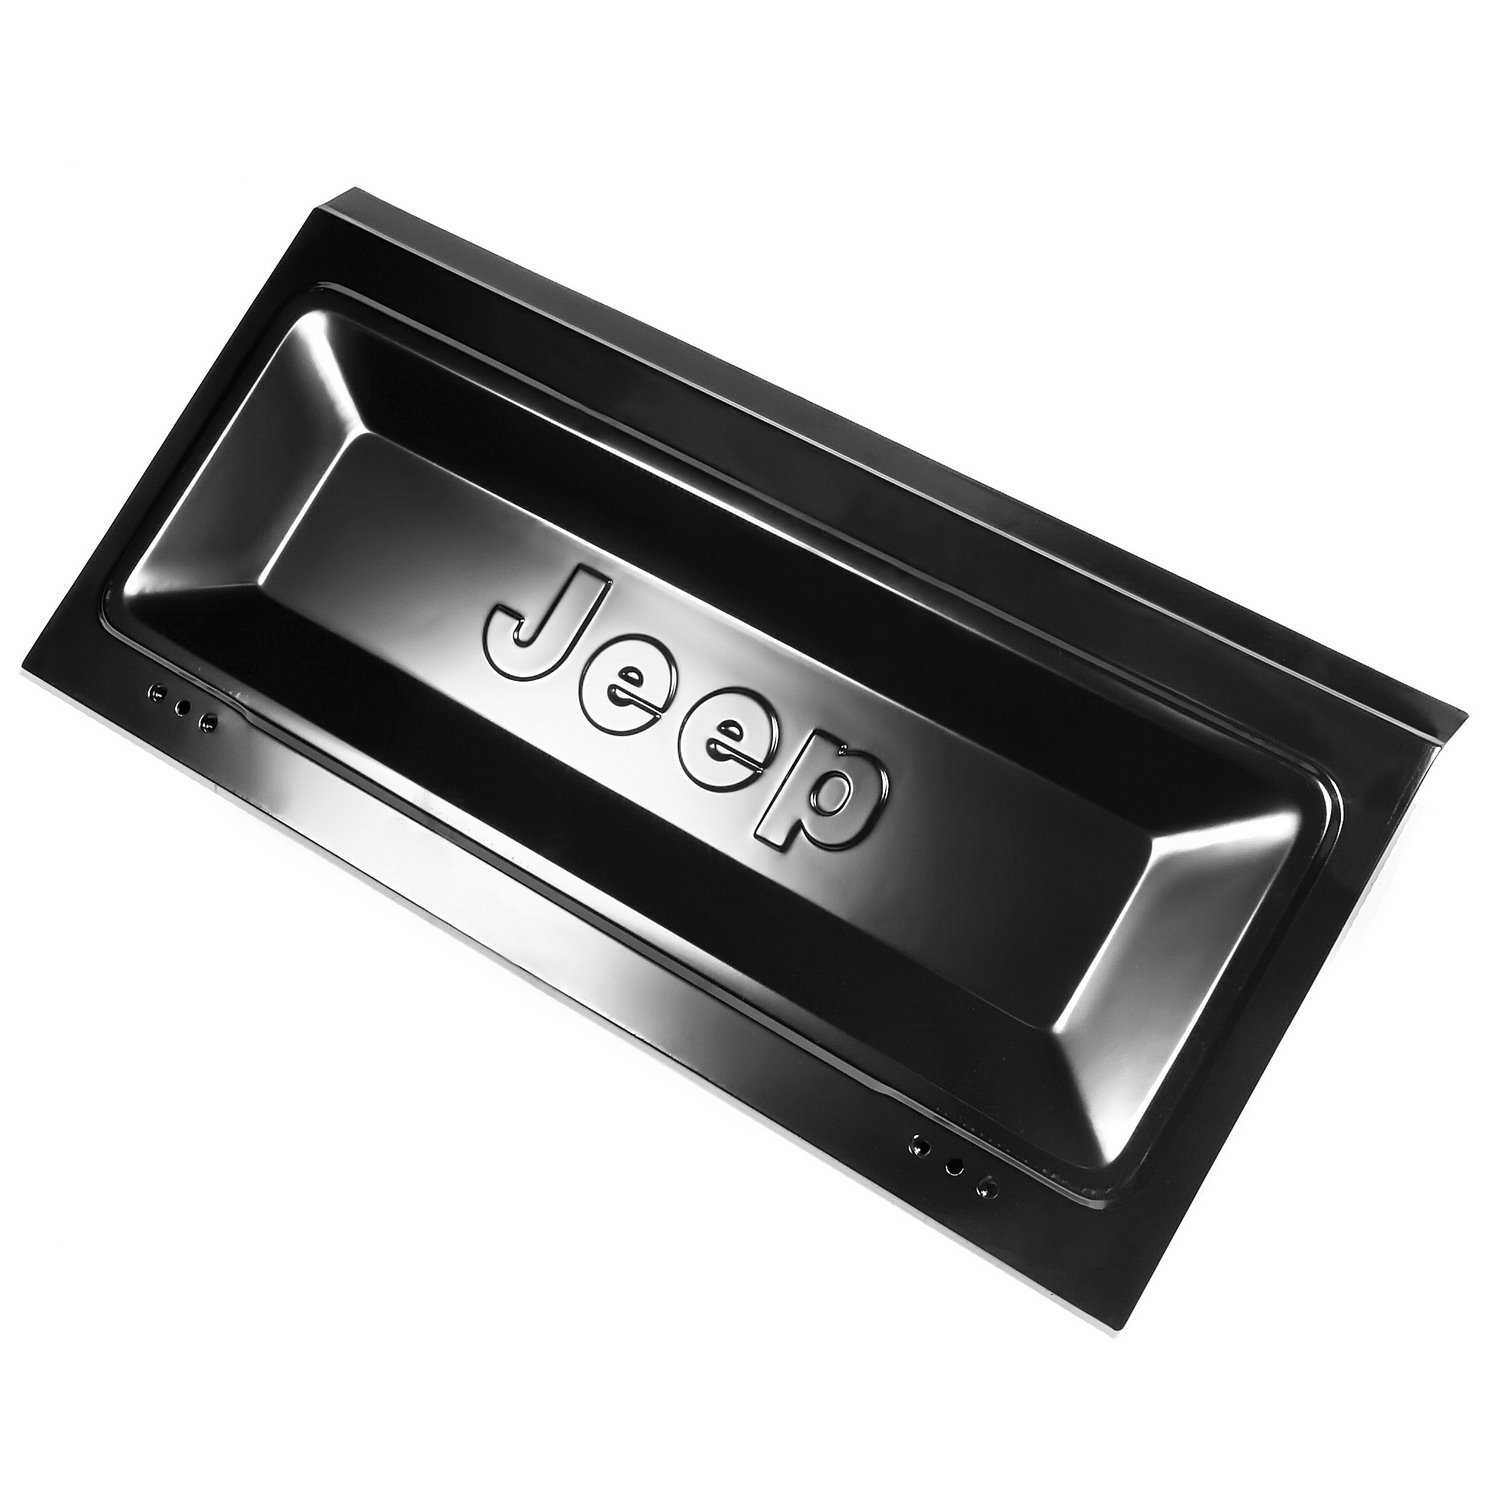 This licensed Mopar tailgate from Omix-ADA has the Jeep name stamp. Fits 76-86 Jeep CJ7 and 81-86 Jeep CJ8.